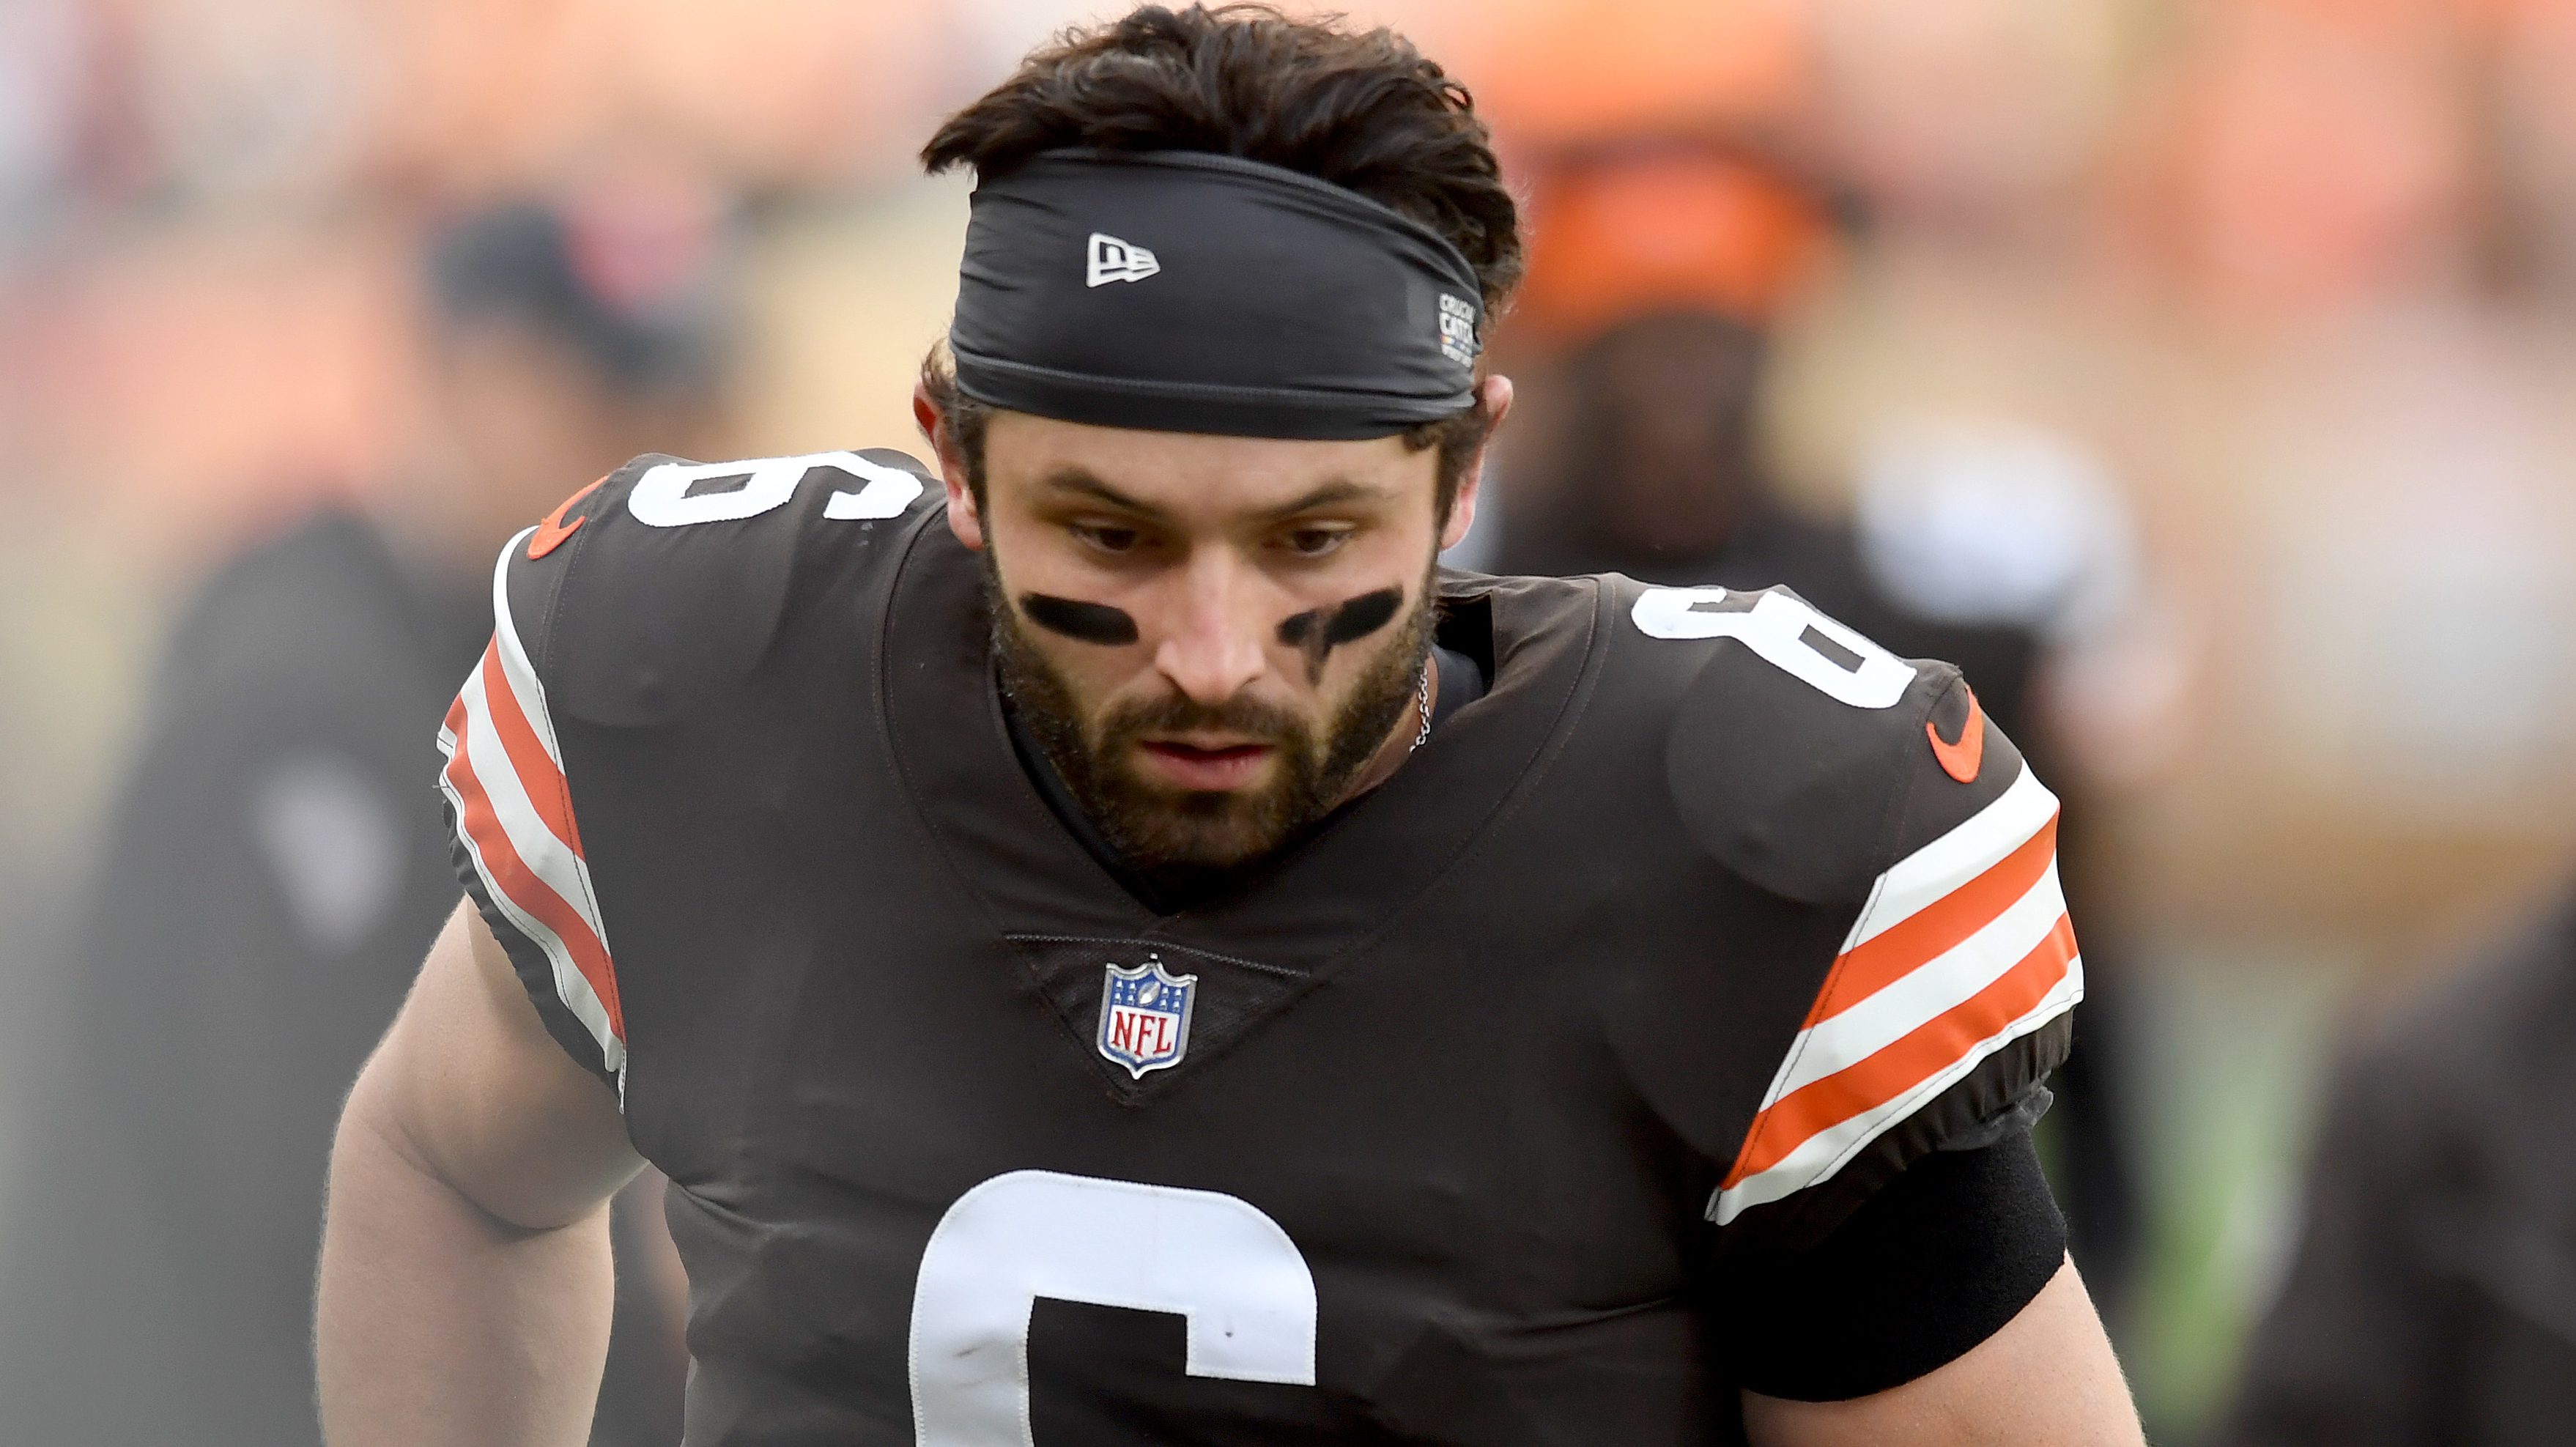 NFL on CBS - Could the Browns draft Baker Mayfield's